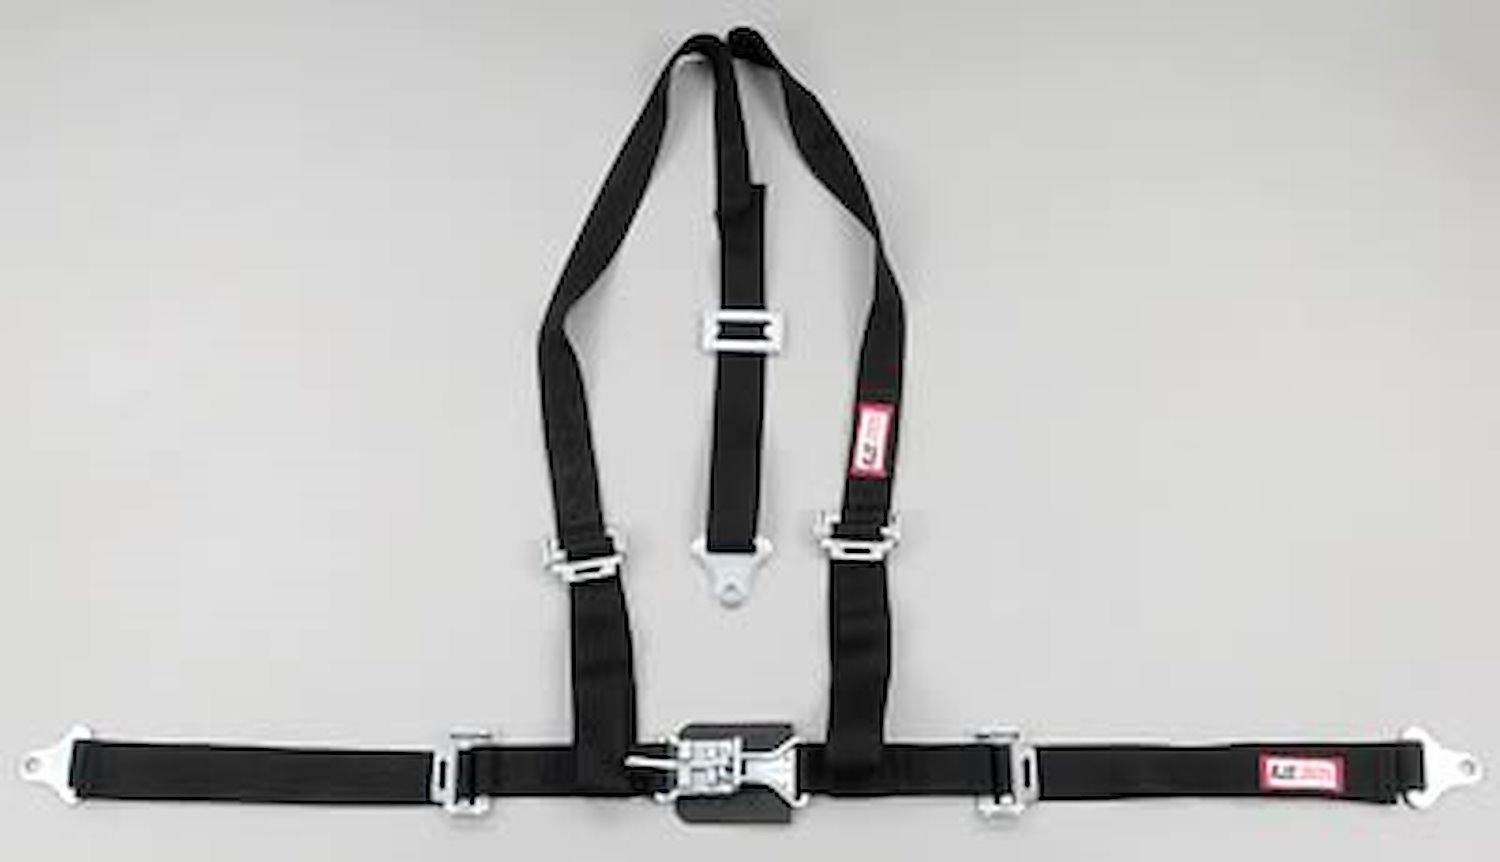 NON-SFI L&L HARNESS 2 PULL DOWN Lap Belt BOLT SEWN IN 2 S.H. INDIVIDUAL FLOOR Mount w/STERNUM STRAP WRAP/BOLT HOT PINK